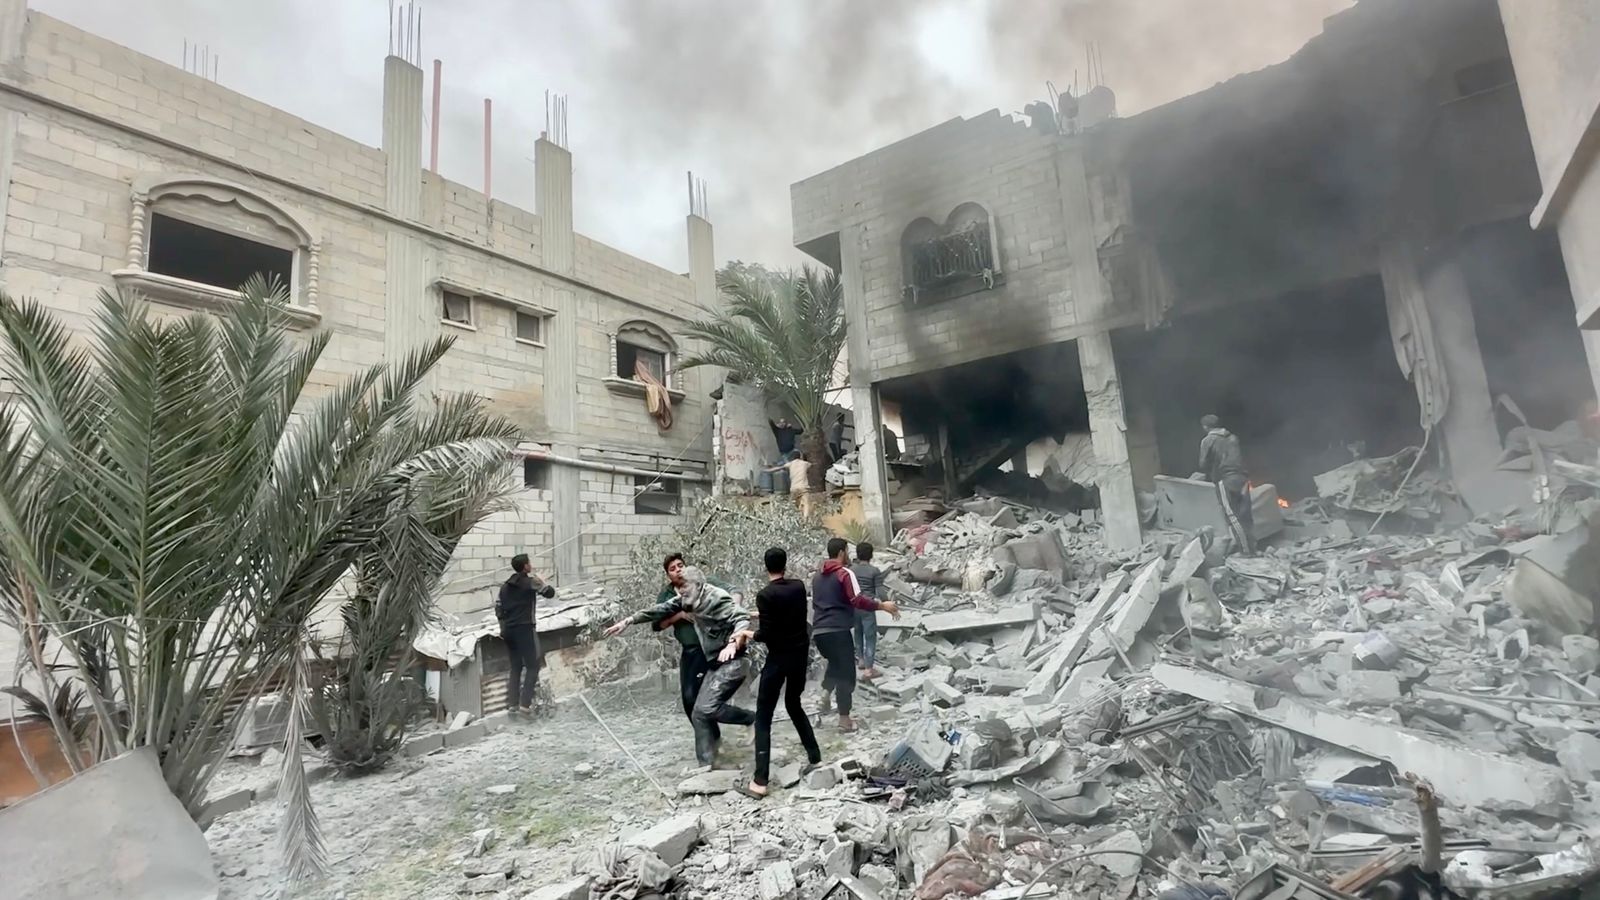 Panic and heartbreak: The devastating effect of an airstrike in Gaza 